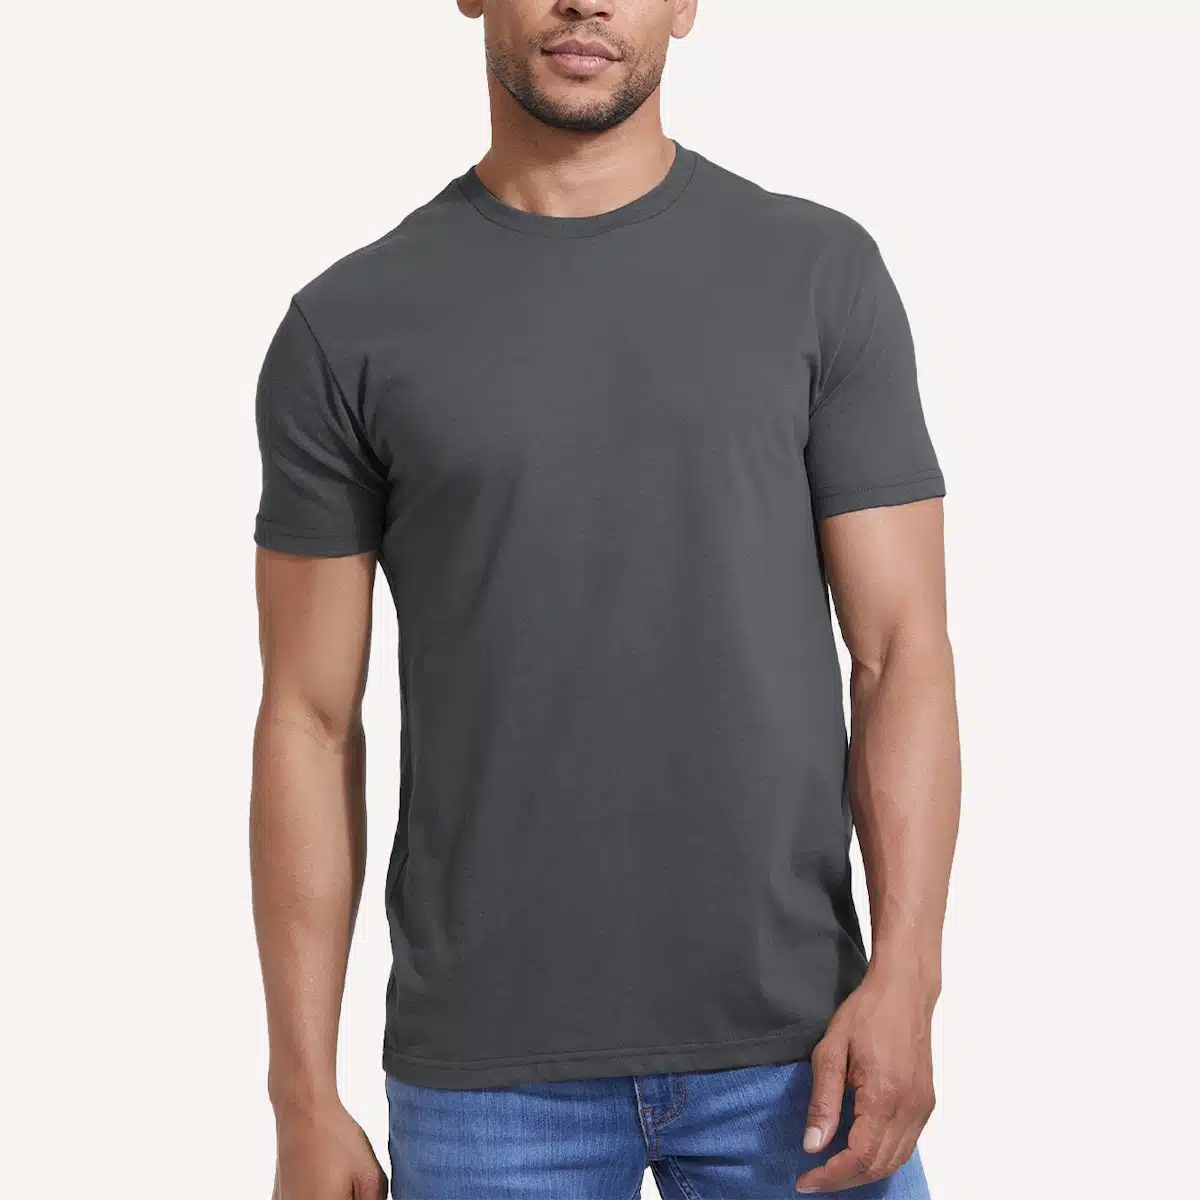 8 Great T-Shirts Brands for Men